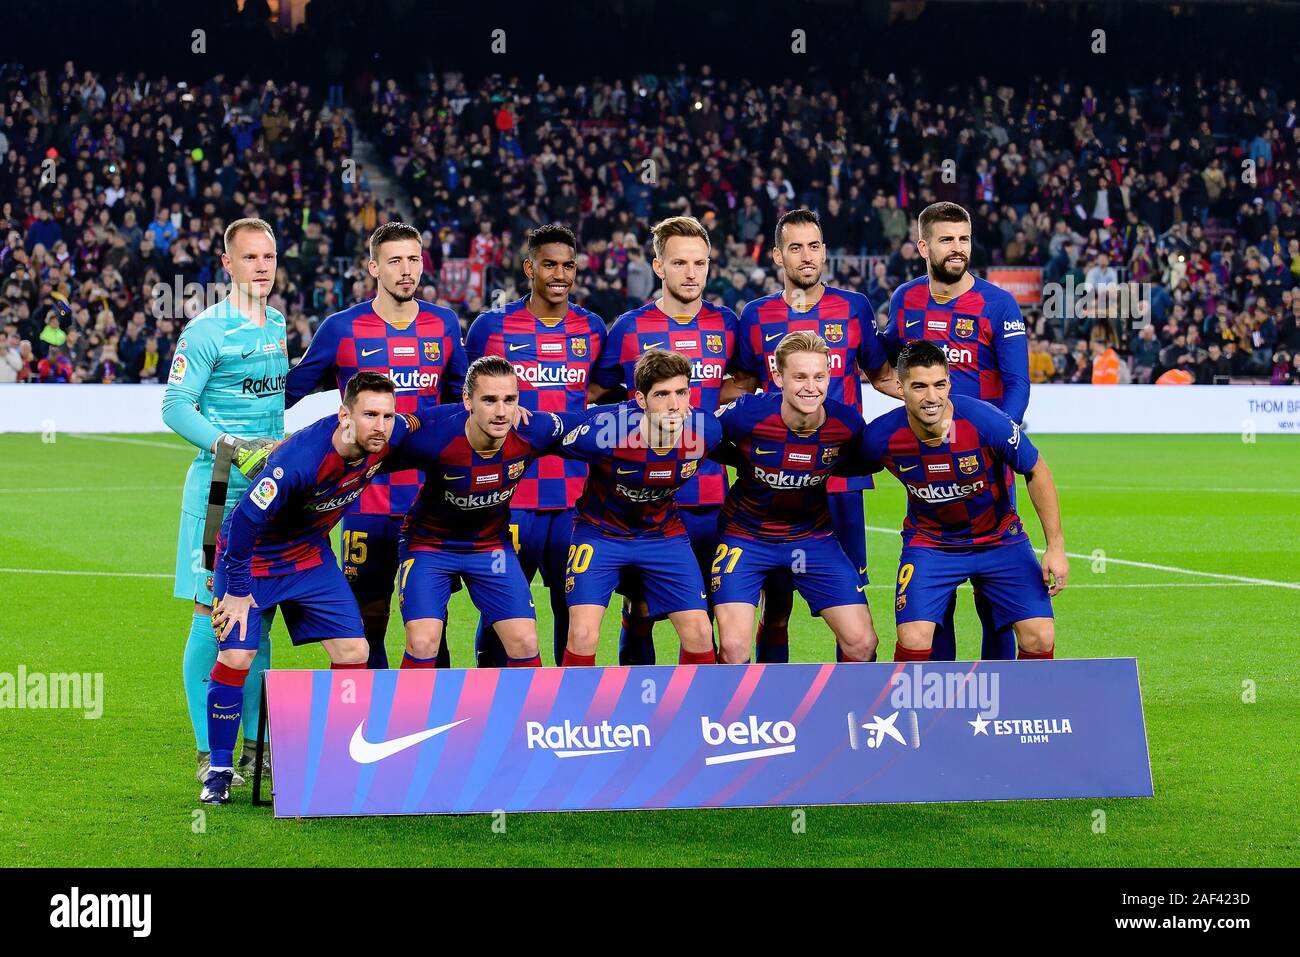 Barcelona Dec 7 Barcelona Players At The La Liga Match Between Fc Barcelona And Rcd Mallorca At The Camp Nou Stadium On December 7 2019 In Barcelo Stock Photo Alamy